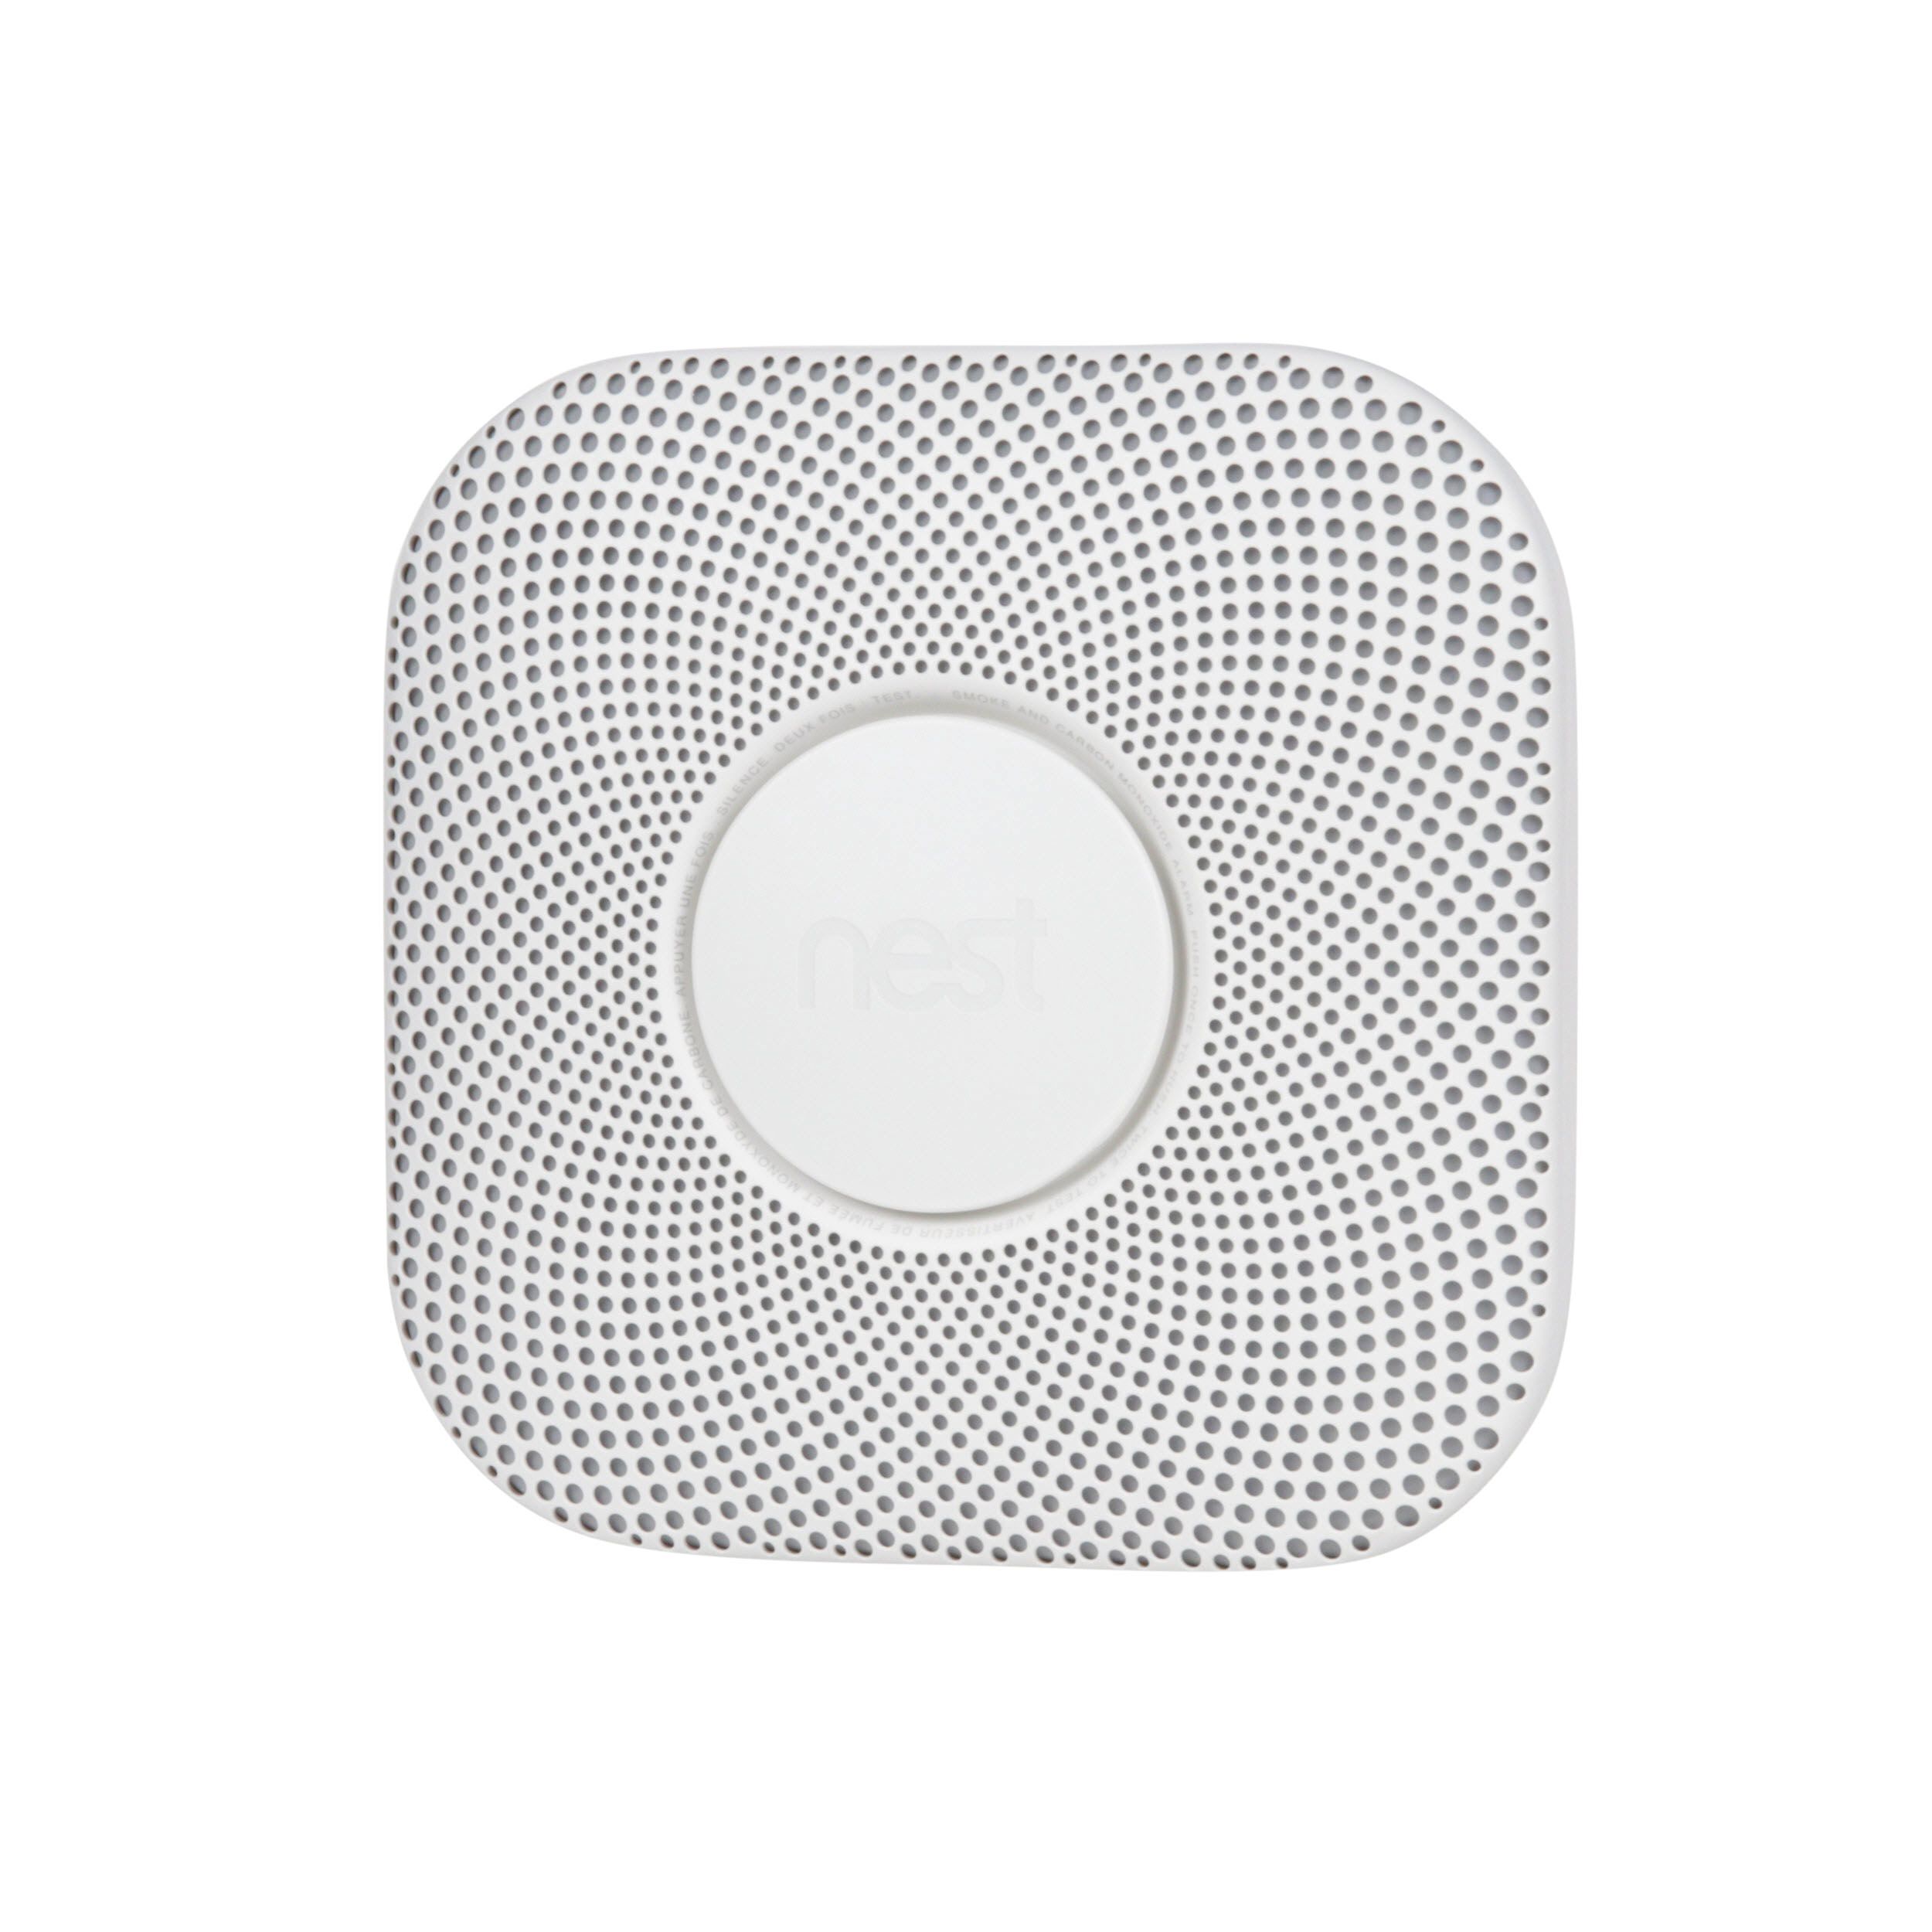 3-Pack Google Nest S3006WBUS Protect Smoke and CO Alarm White Battery 